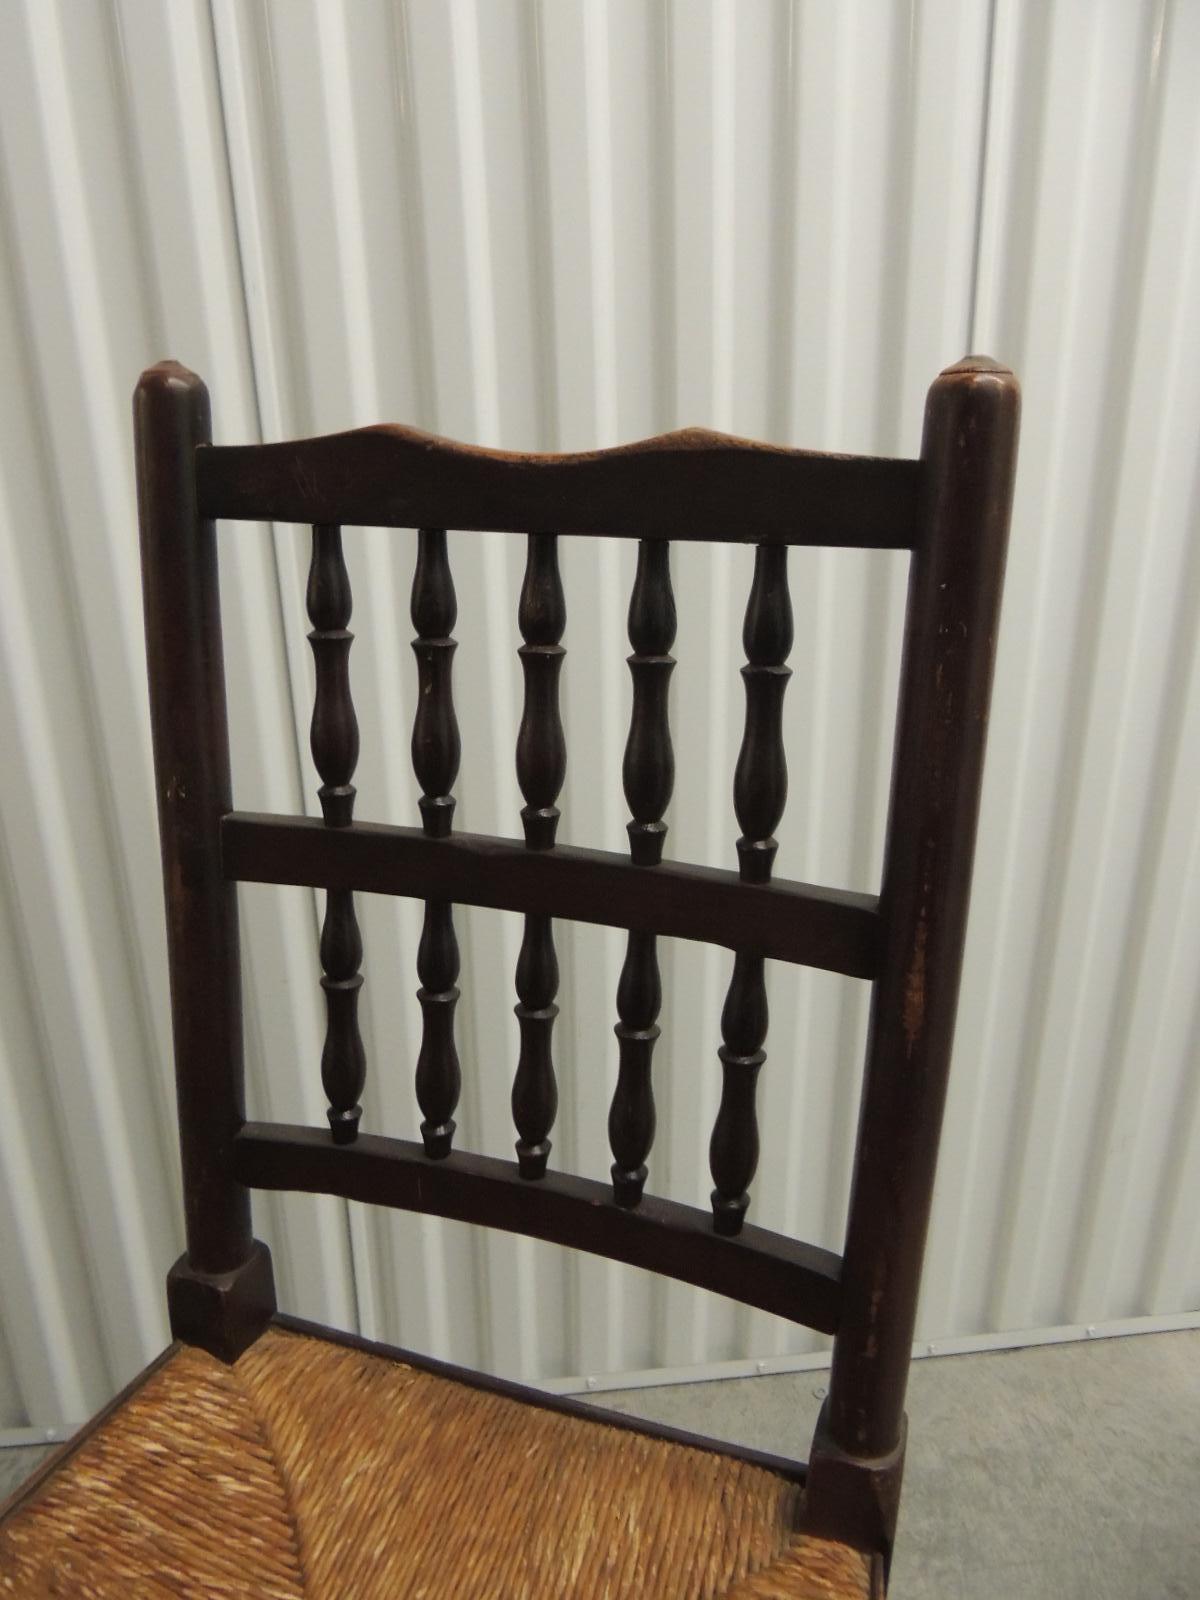 English country antique wood dining chair with rush seat. Harlequin spindle back. Georgian elm and oakwood, circa 1820s
English style with turned wood details in the back.
Note: This listing is just for 1 chair only.
Measures: 19 x 16 x 38 BH x